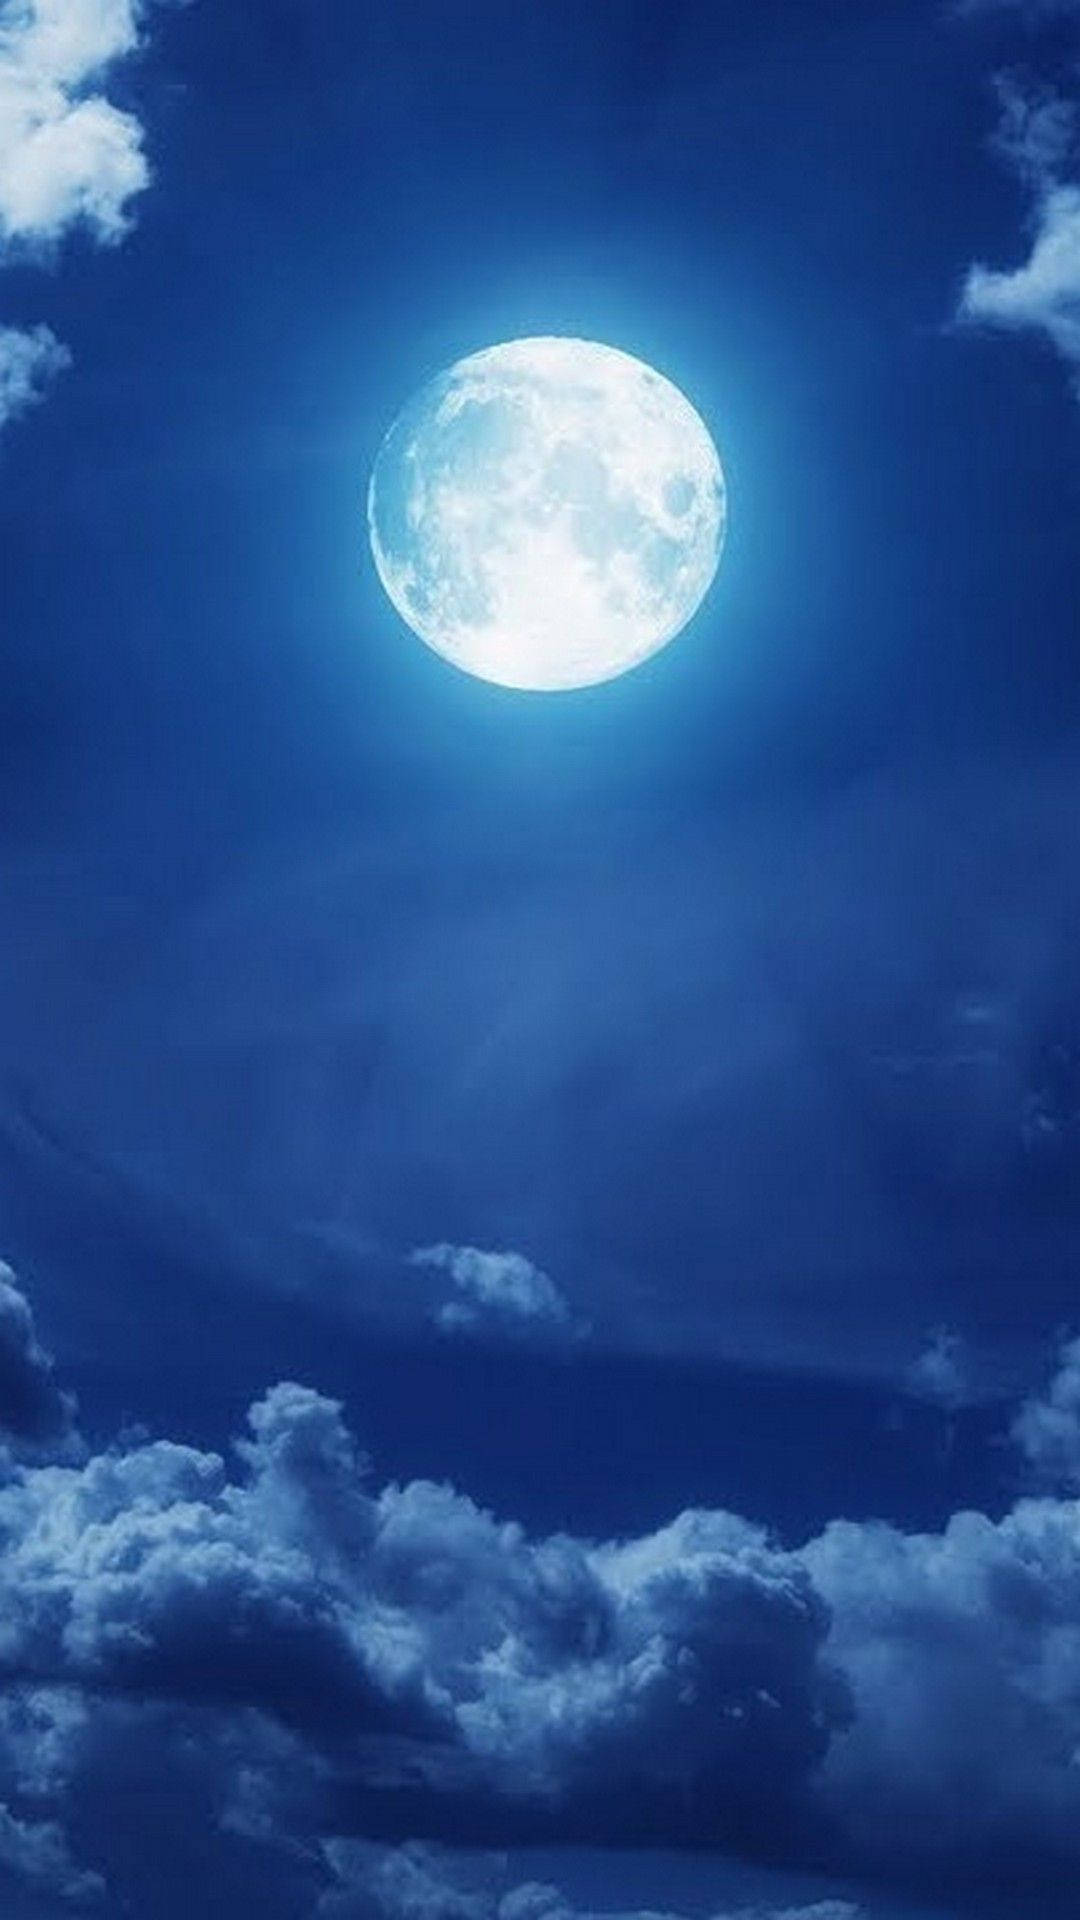 Beautiful Moon Over The Clouds Wallpaper